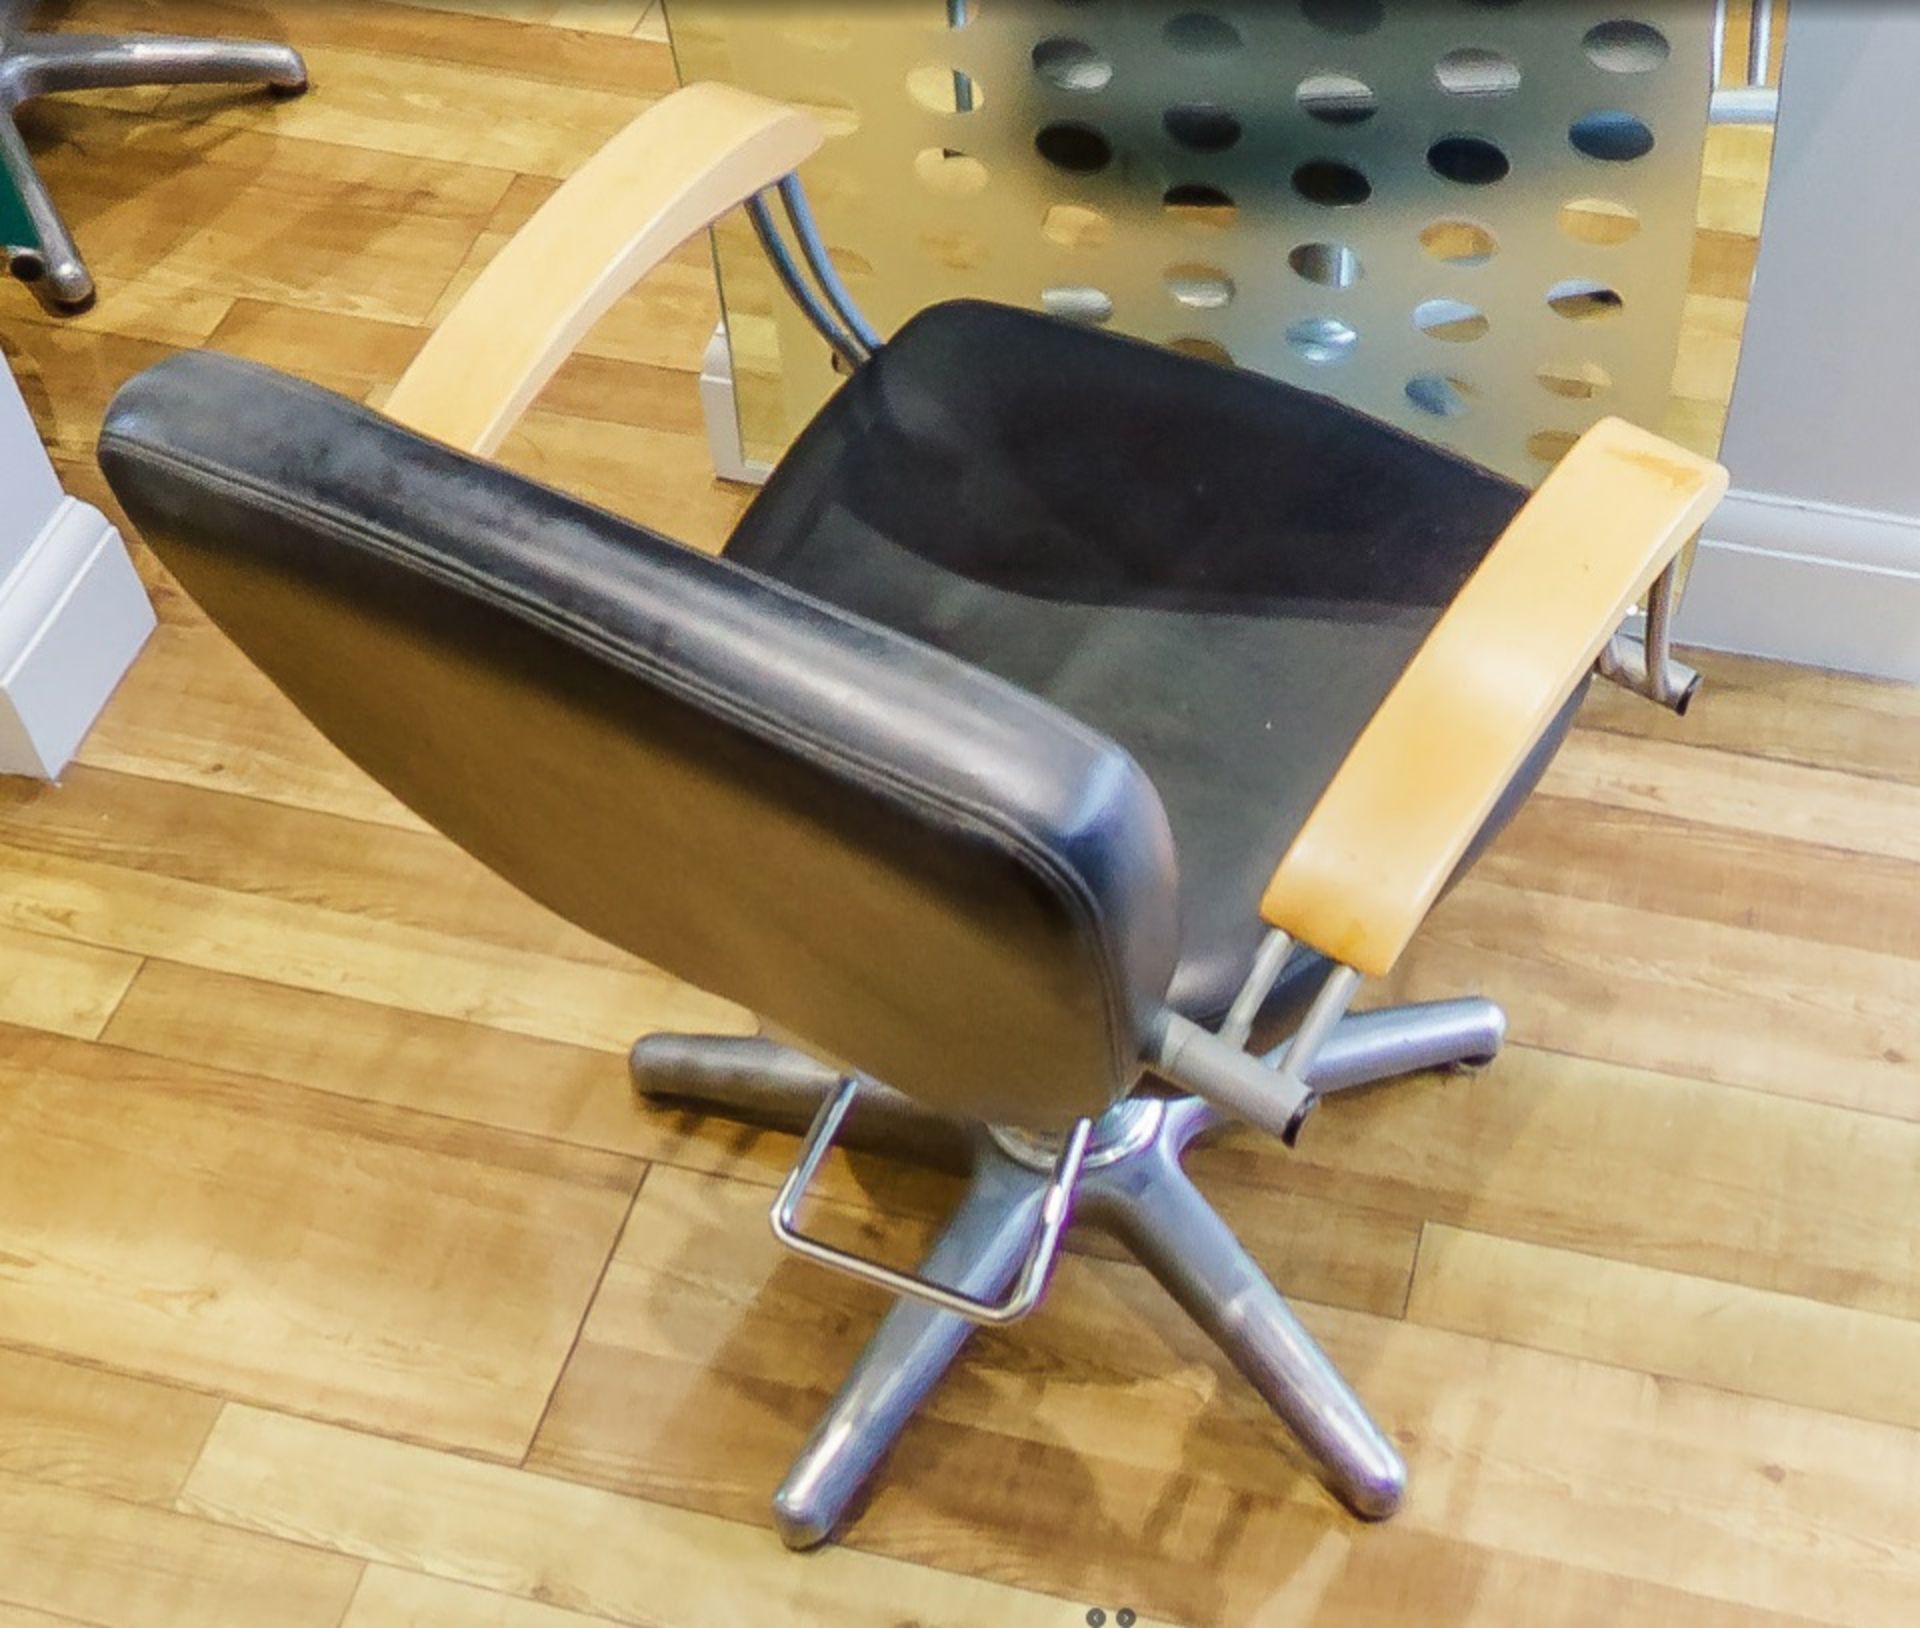 1 x Adjustable Black Hydraulic Barber Hairdressing Chair - Recently Removed From A Boutique Hair - Image 3 of 10